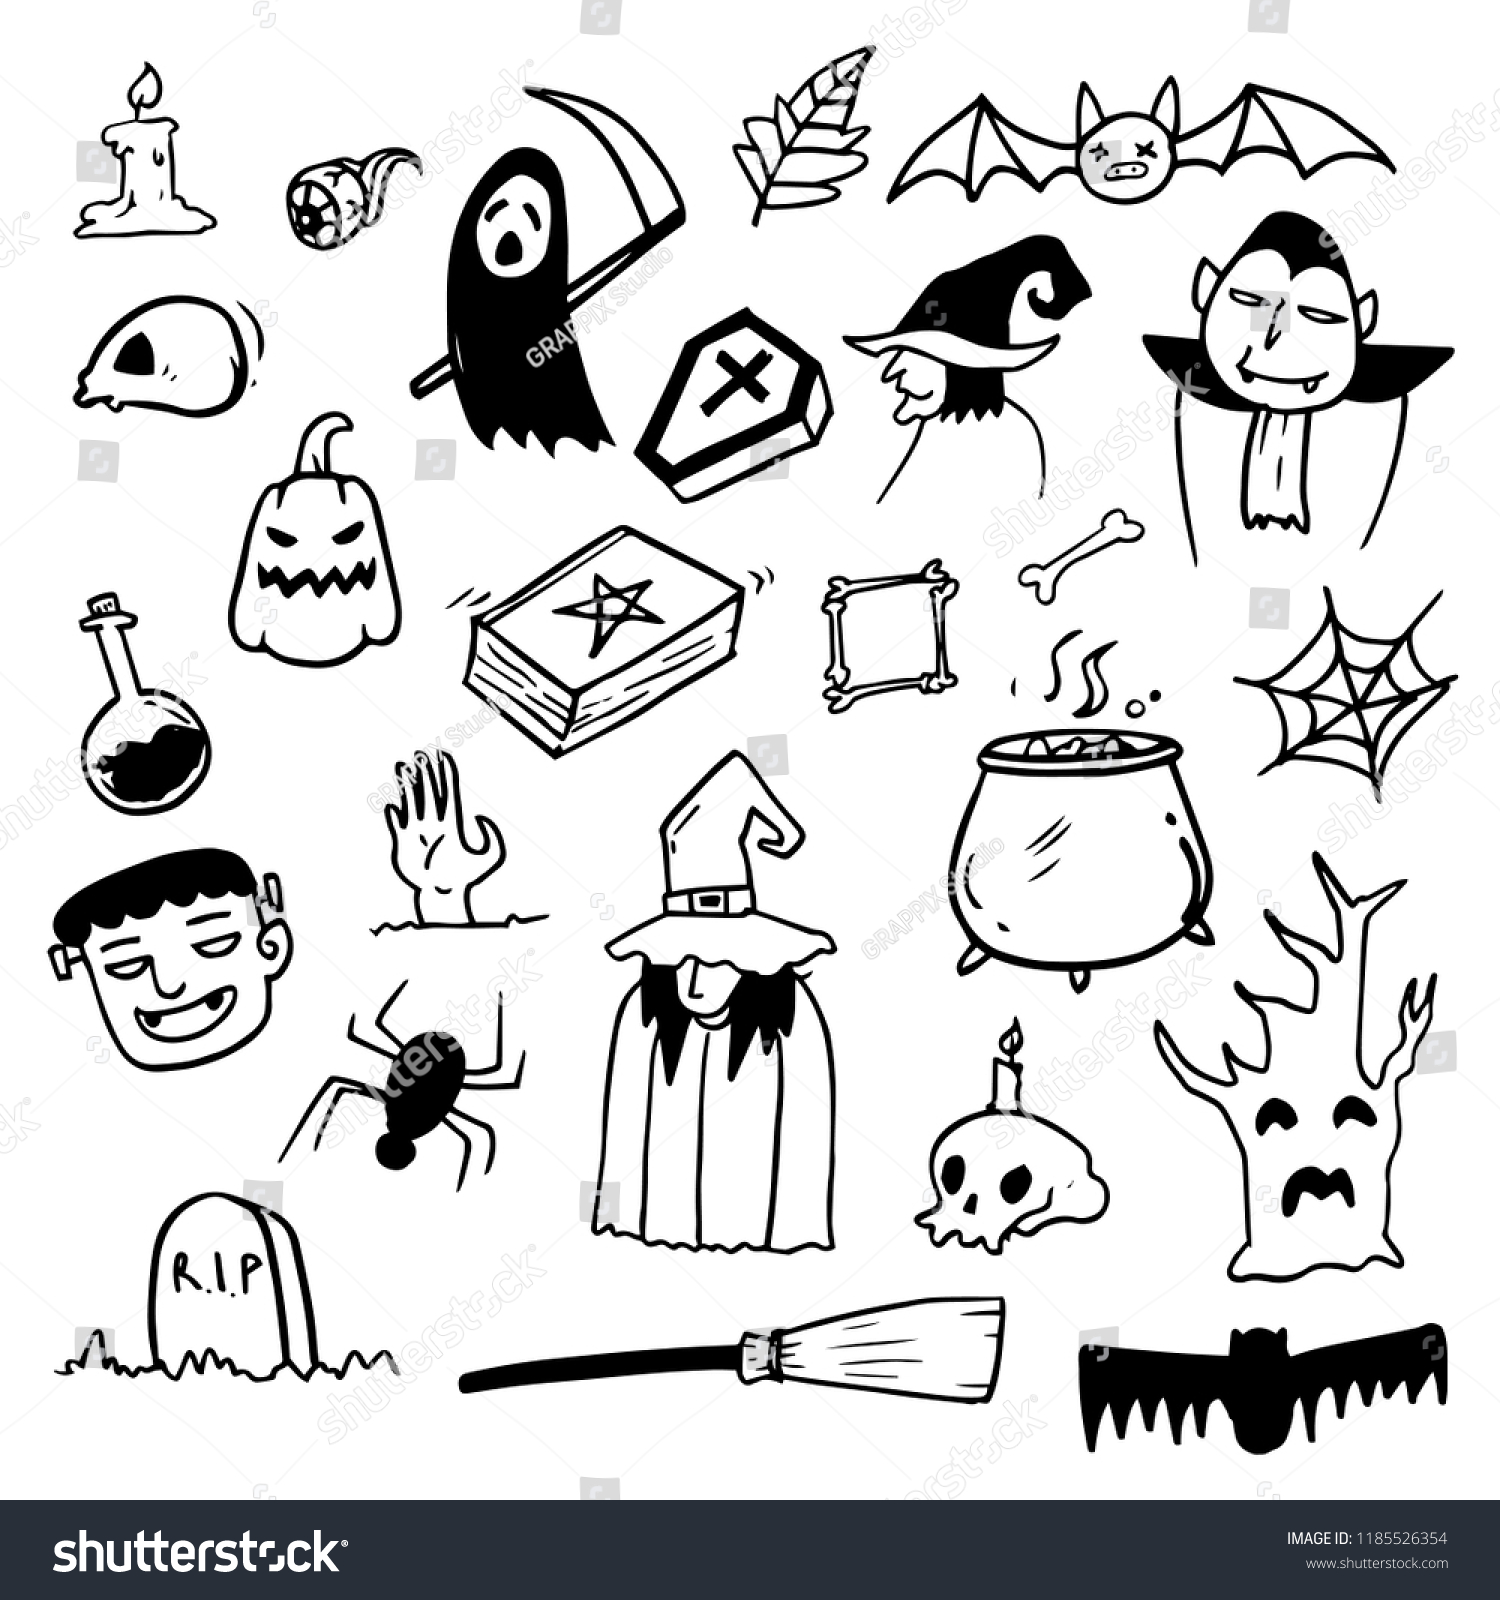 28+ Cool Halloween Drawing Ideas PNG